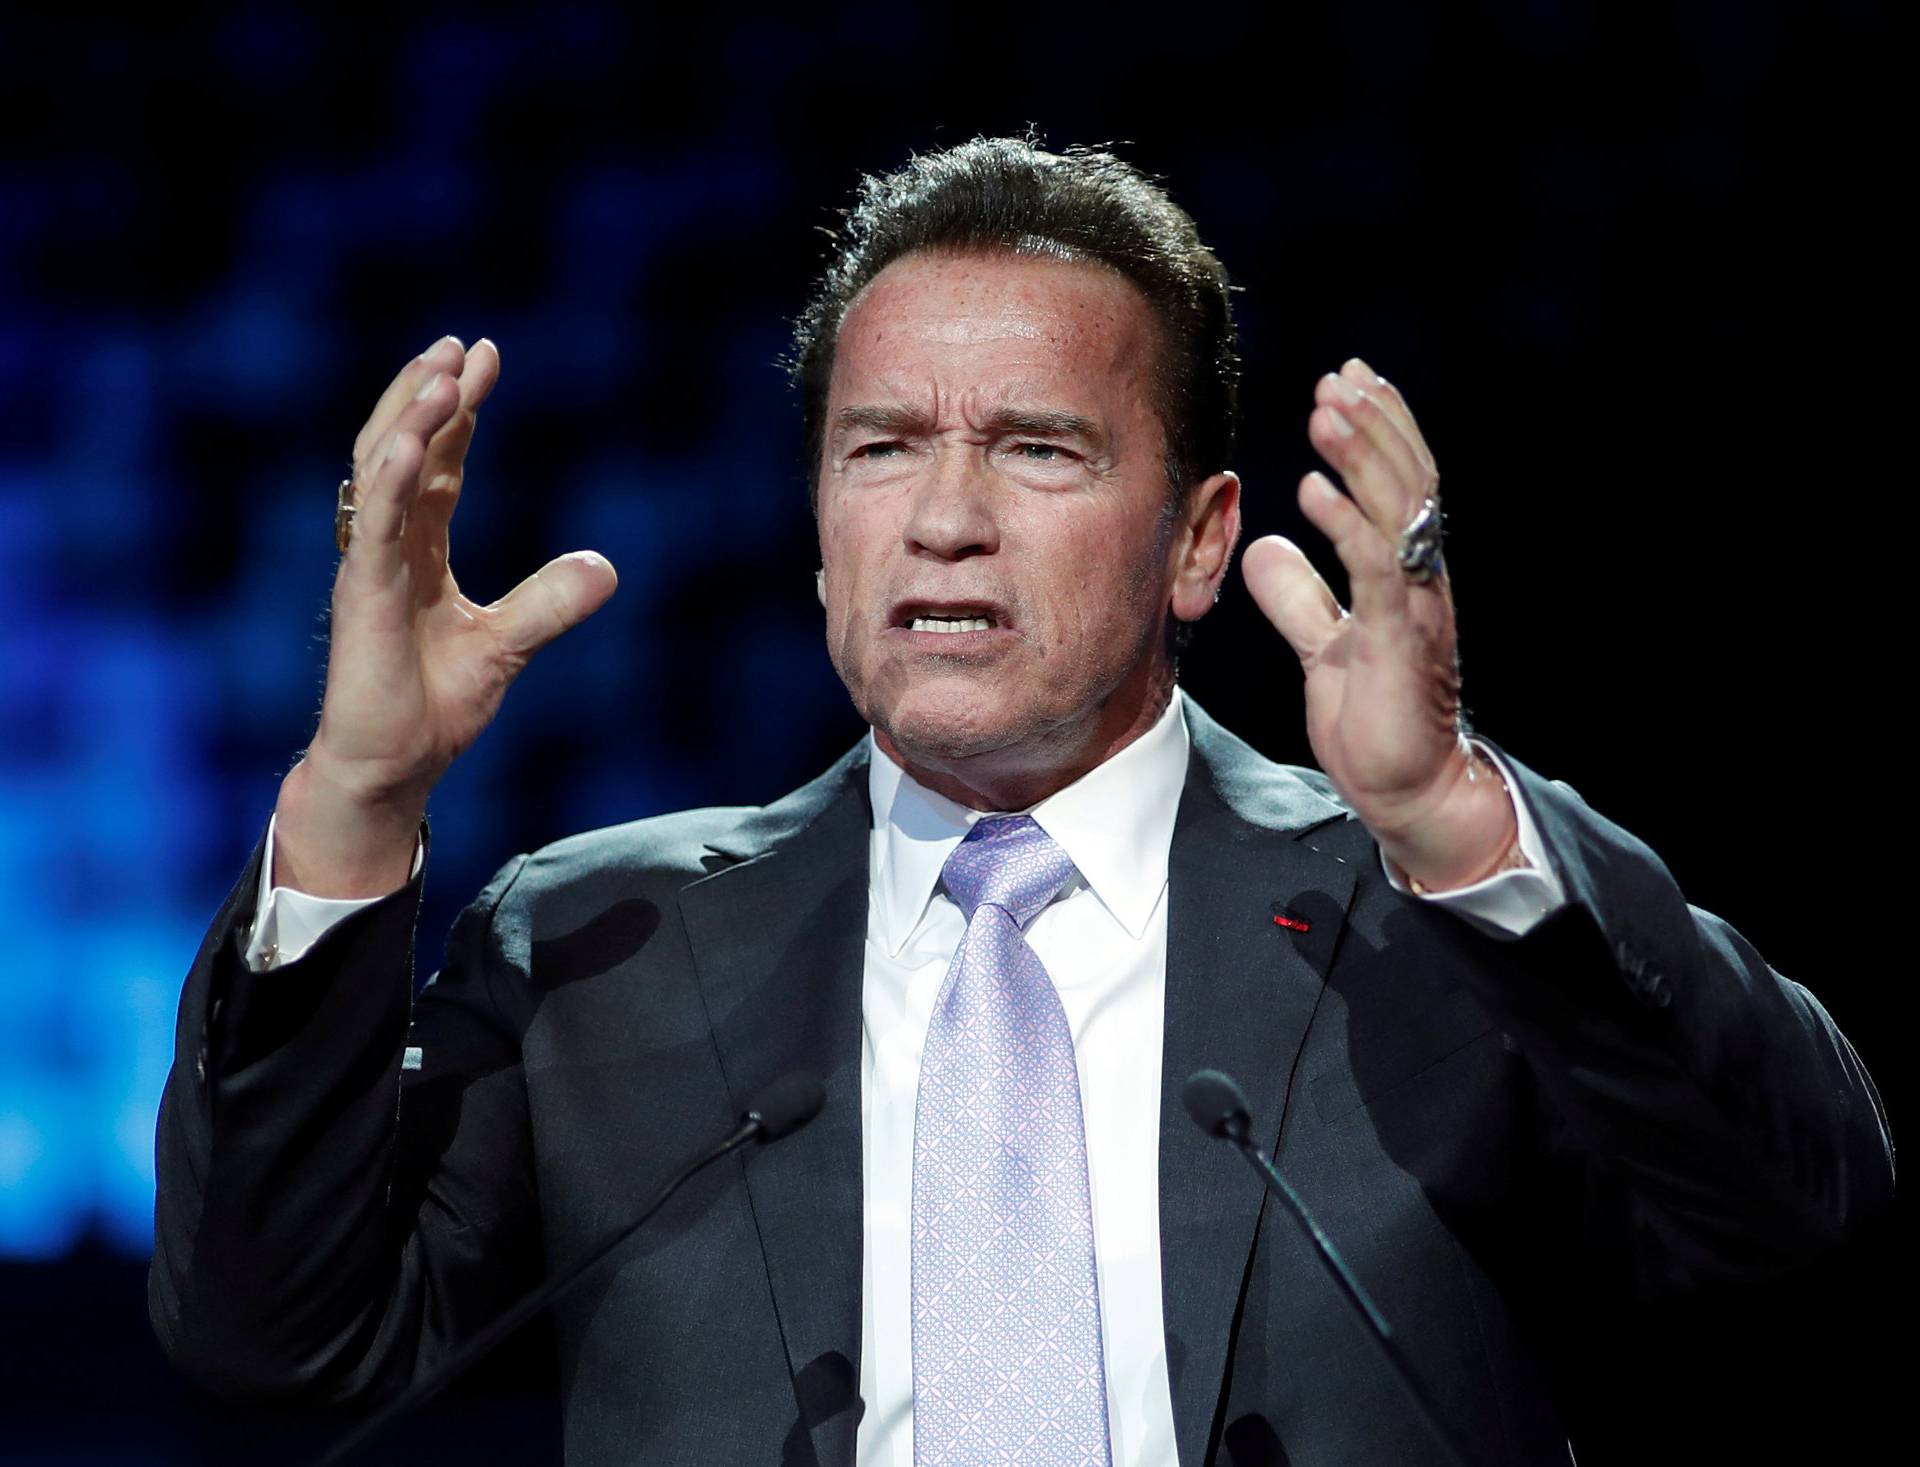 R20 Founder and former California state governor Arnold Schwarzenegger delivers a speech during the One Planet Summit at the Seine Musicale center in Boulogne-Billancourt